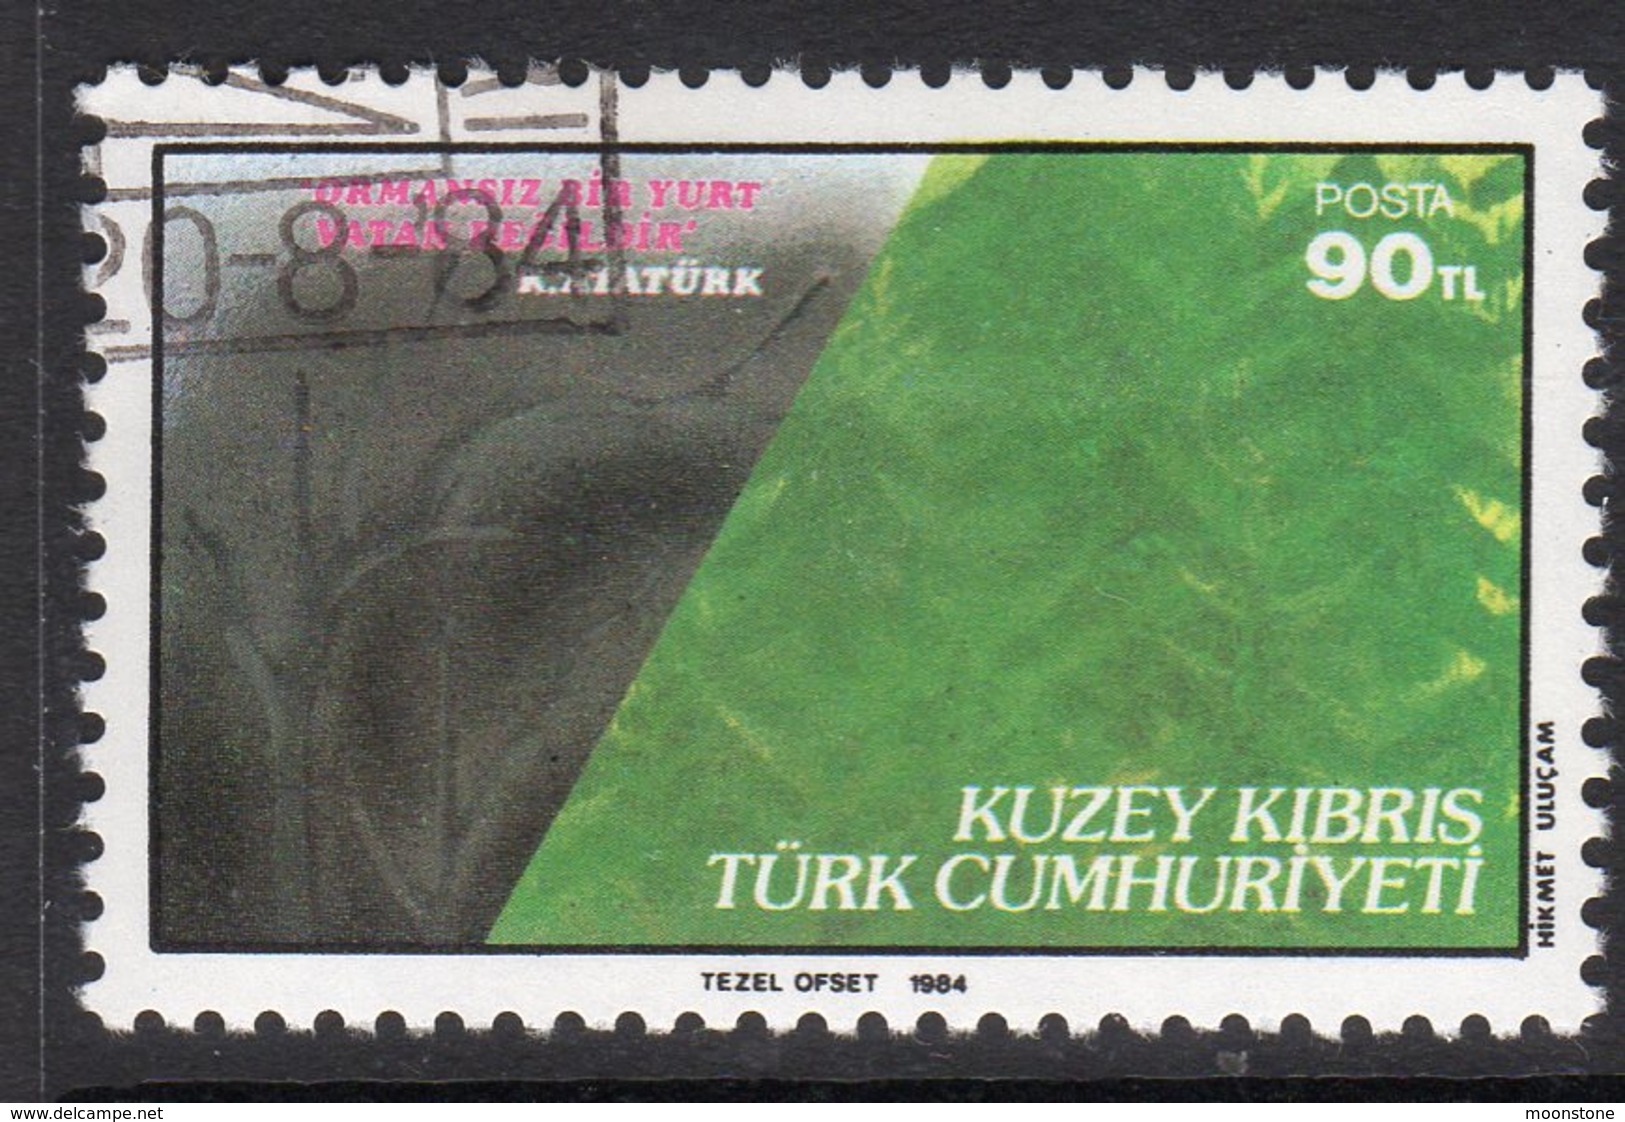 Cyprus Turkish 1984 World Forestry Resources, Used, SG 156 (A) - Used Stamps